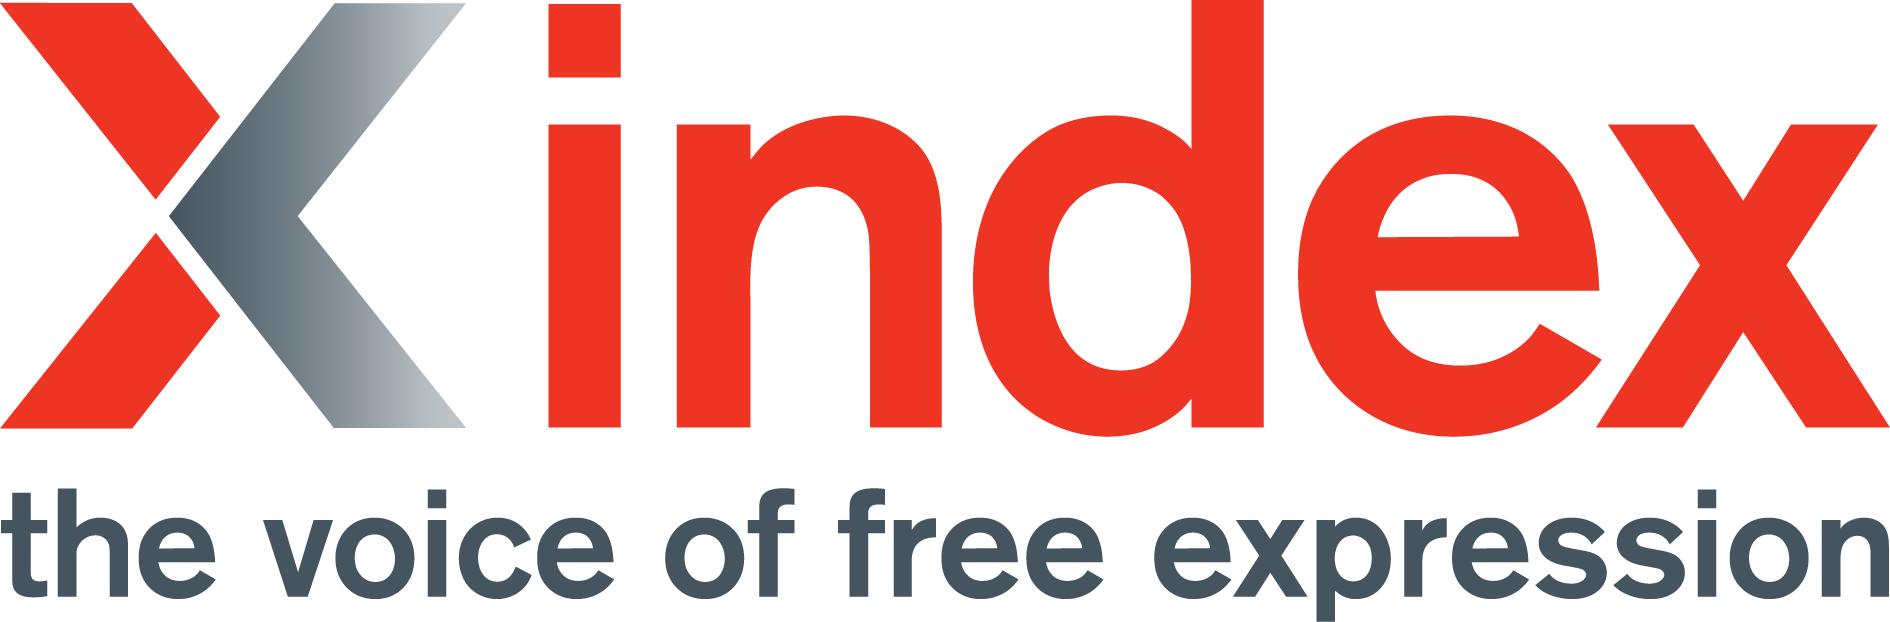 Index on Censorship joins unprecedented press freedom mission to US